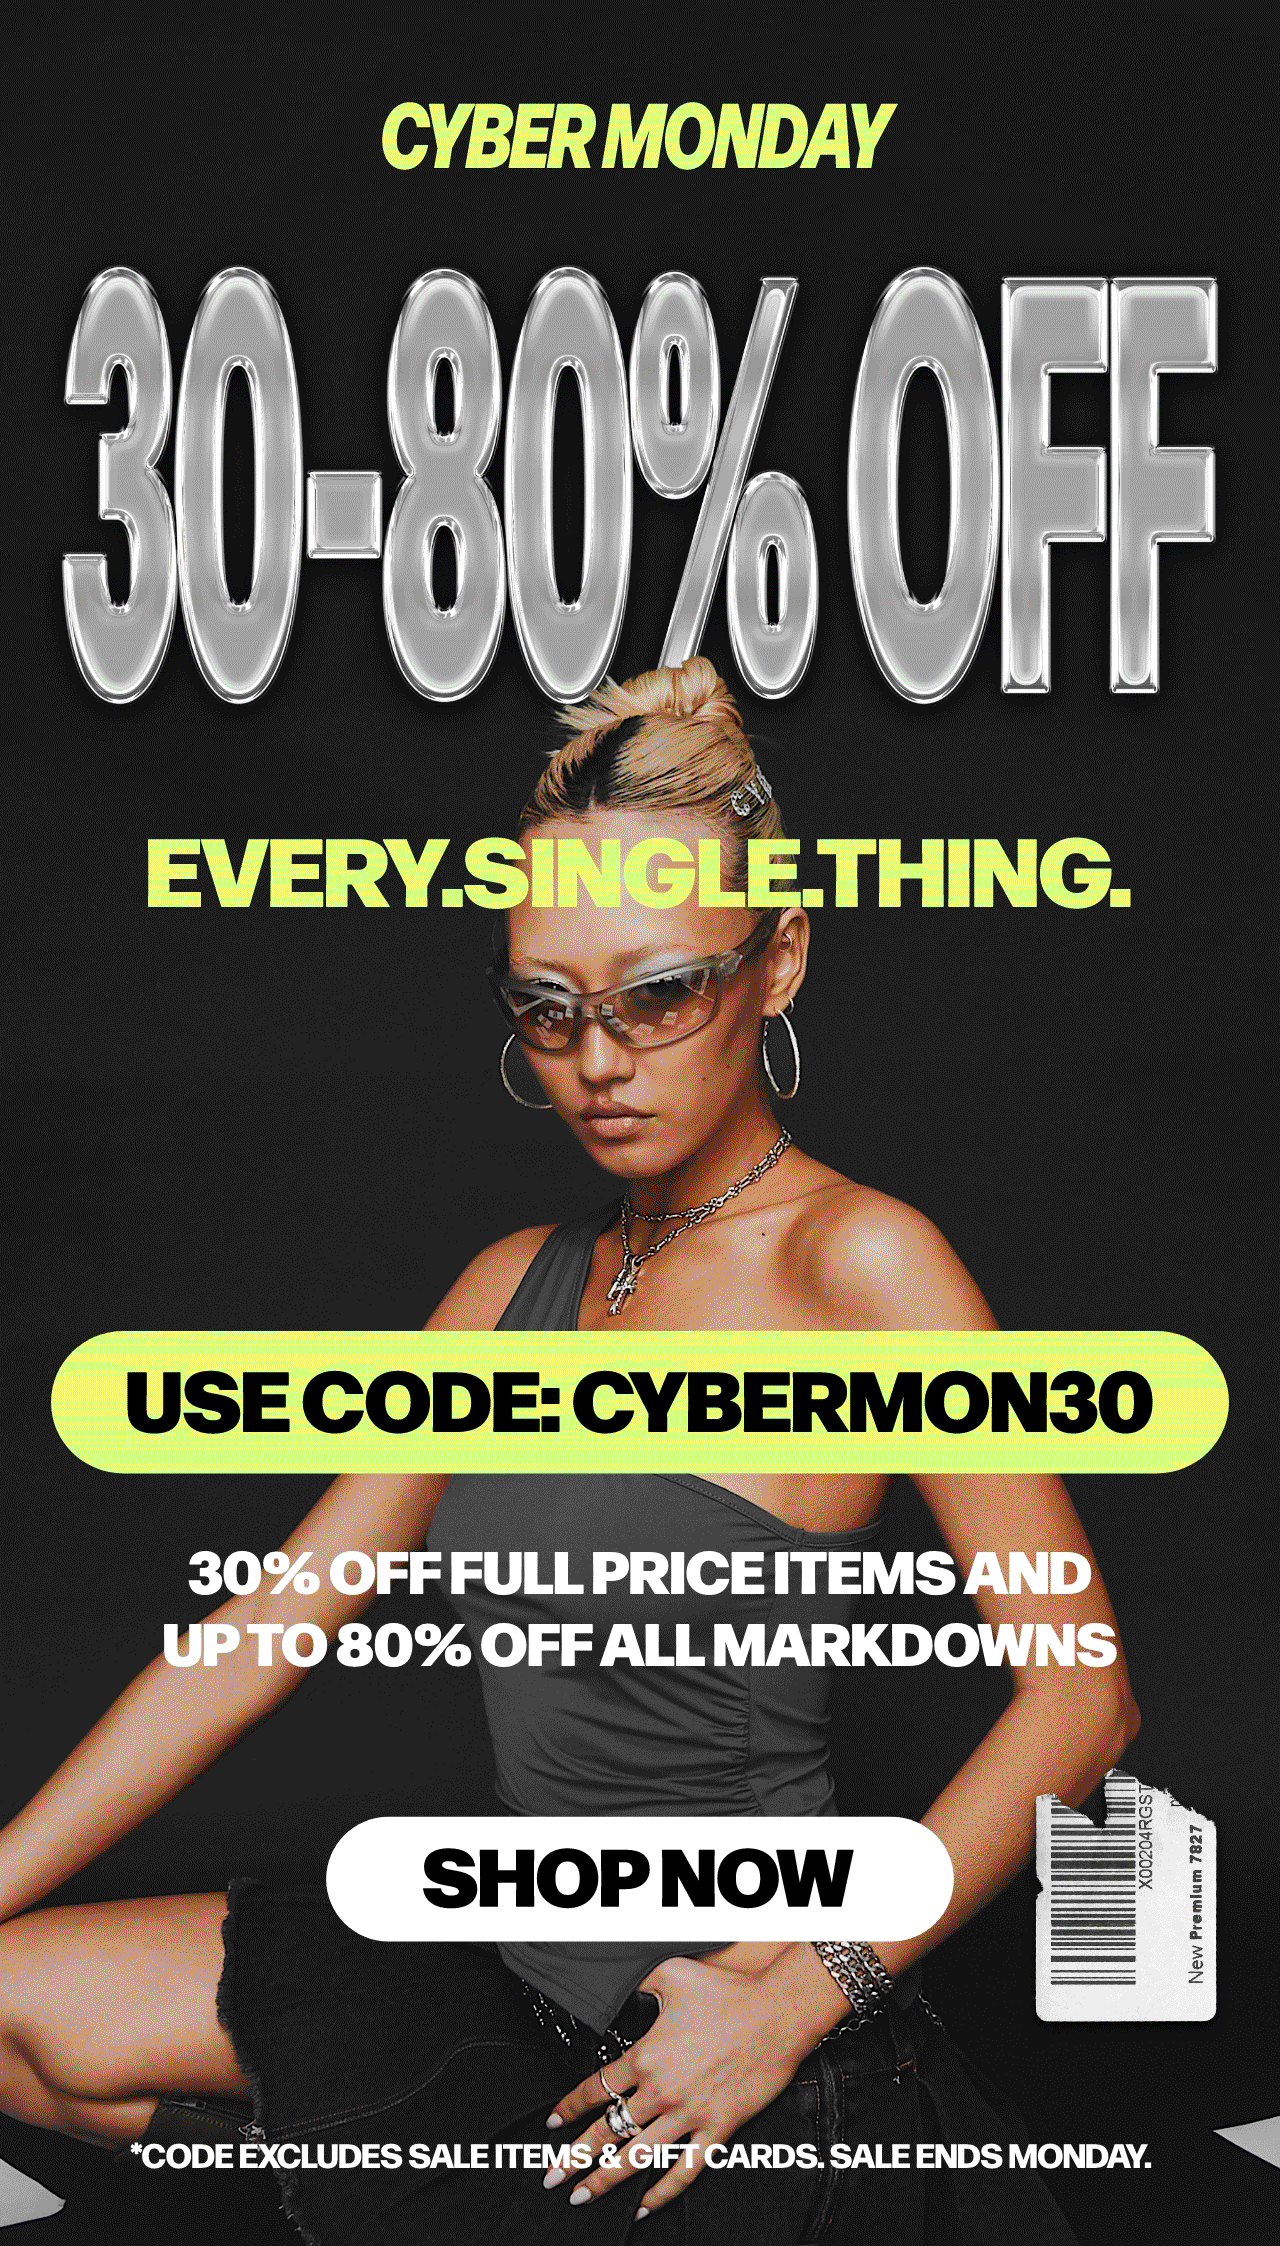 30-80% off everything?! Be quick, once they’re gone, they’re gone